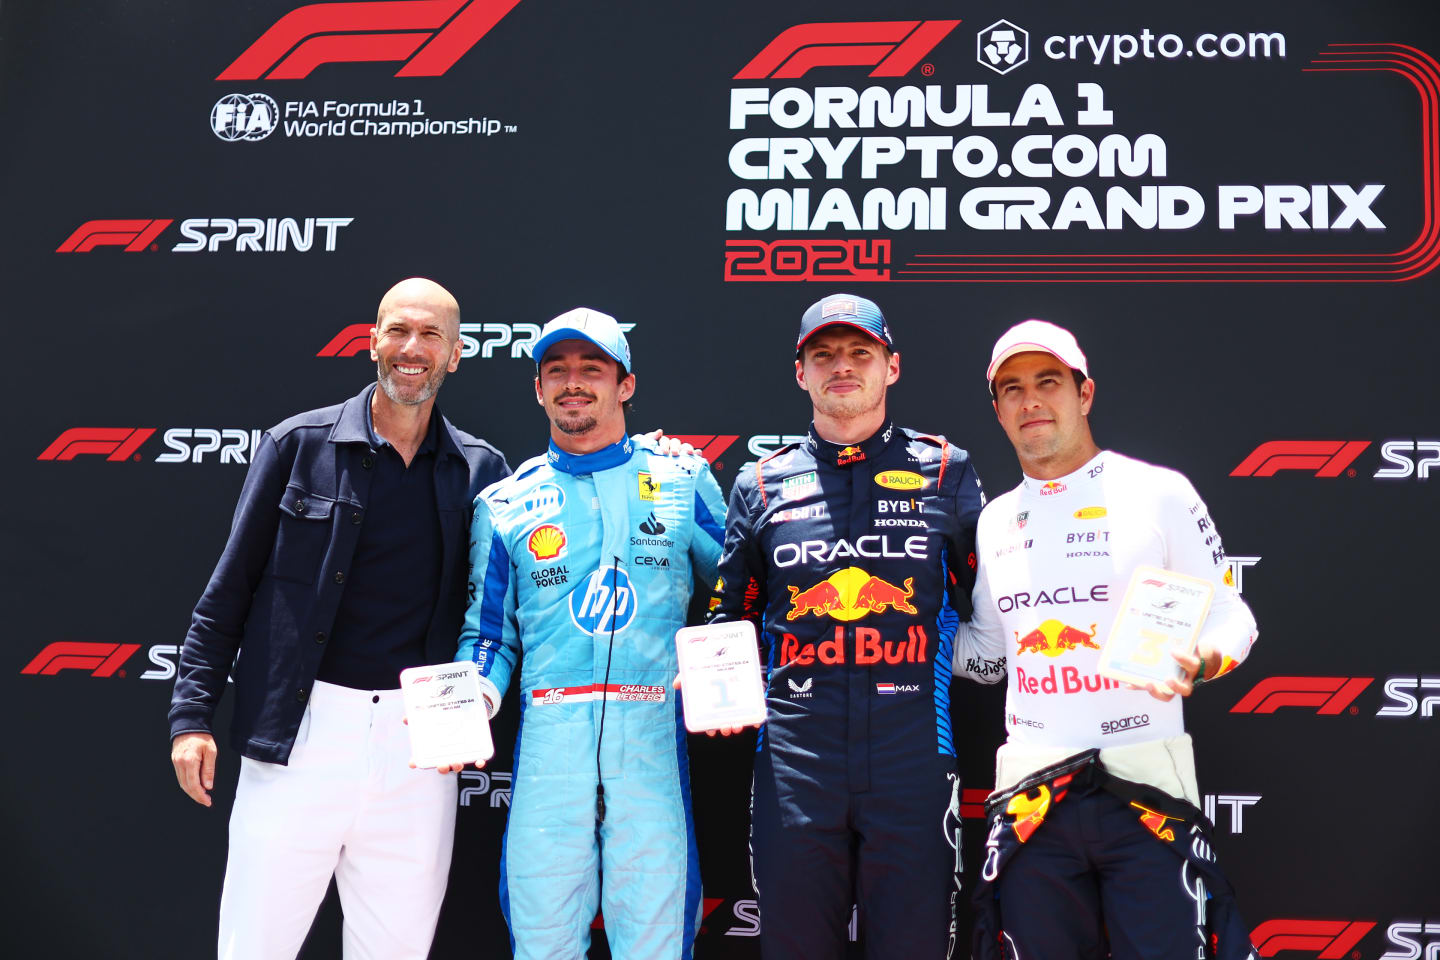 MIAMI, FLORIDA - MAY 04: Sprint winner Max Verstappen of the Netherlands and Oracle Red Bull Racing, Second placed Charles Leclerc of Monaco and Ferrari, Third placed Sergio Perez of Mexico and Oracle Red Bull Racing and Zinedine Zidane pose for a photo in parc ferme during the Sprint ahead of the F1 Grand Prix of Miami at Miami International Autodrome on May 04, 2024 in Miami, Florida. (Photo by Clive Rose - Formula 1/Formula 1 via Getty Images)